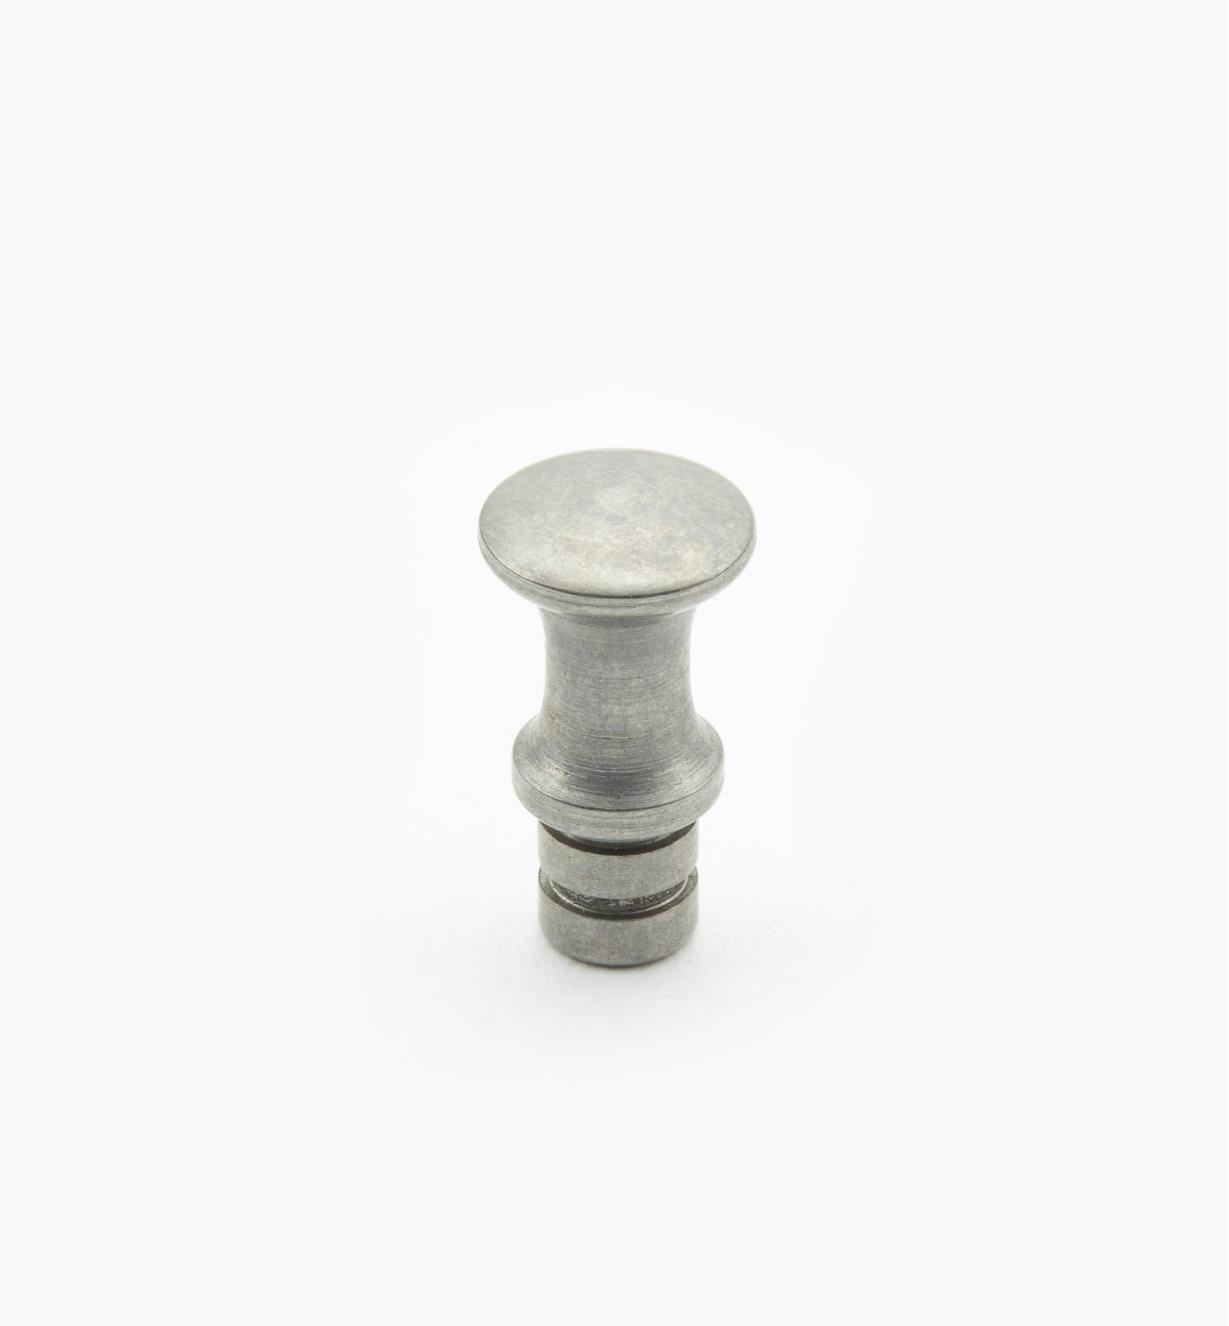 05H2221 - 5/16" x 3/8" Lee Valley Small Turned Stainless Steel Knob (9/16")